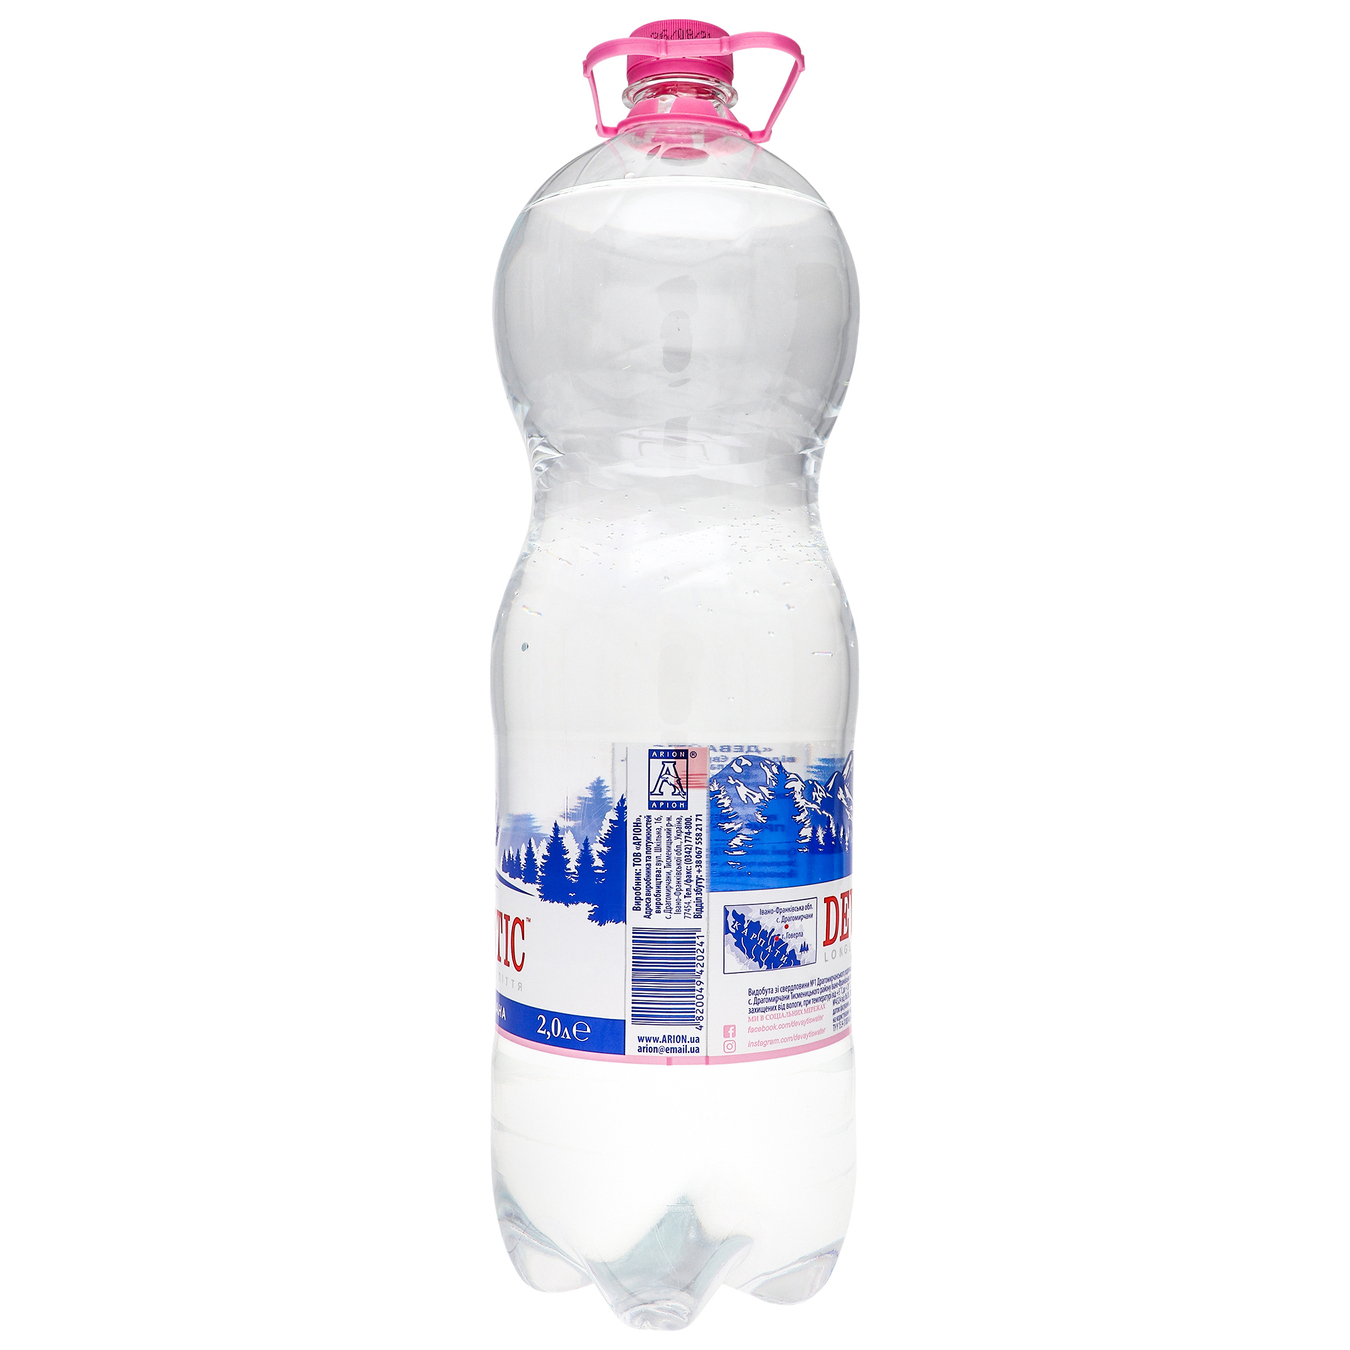 Devaitis strongly carbonated water 2liters 2